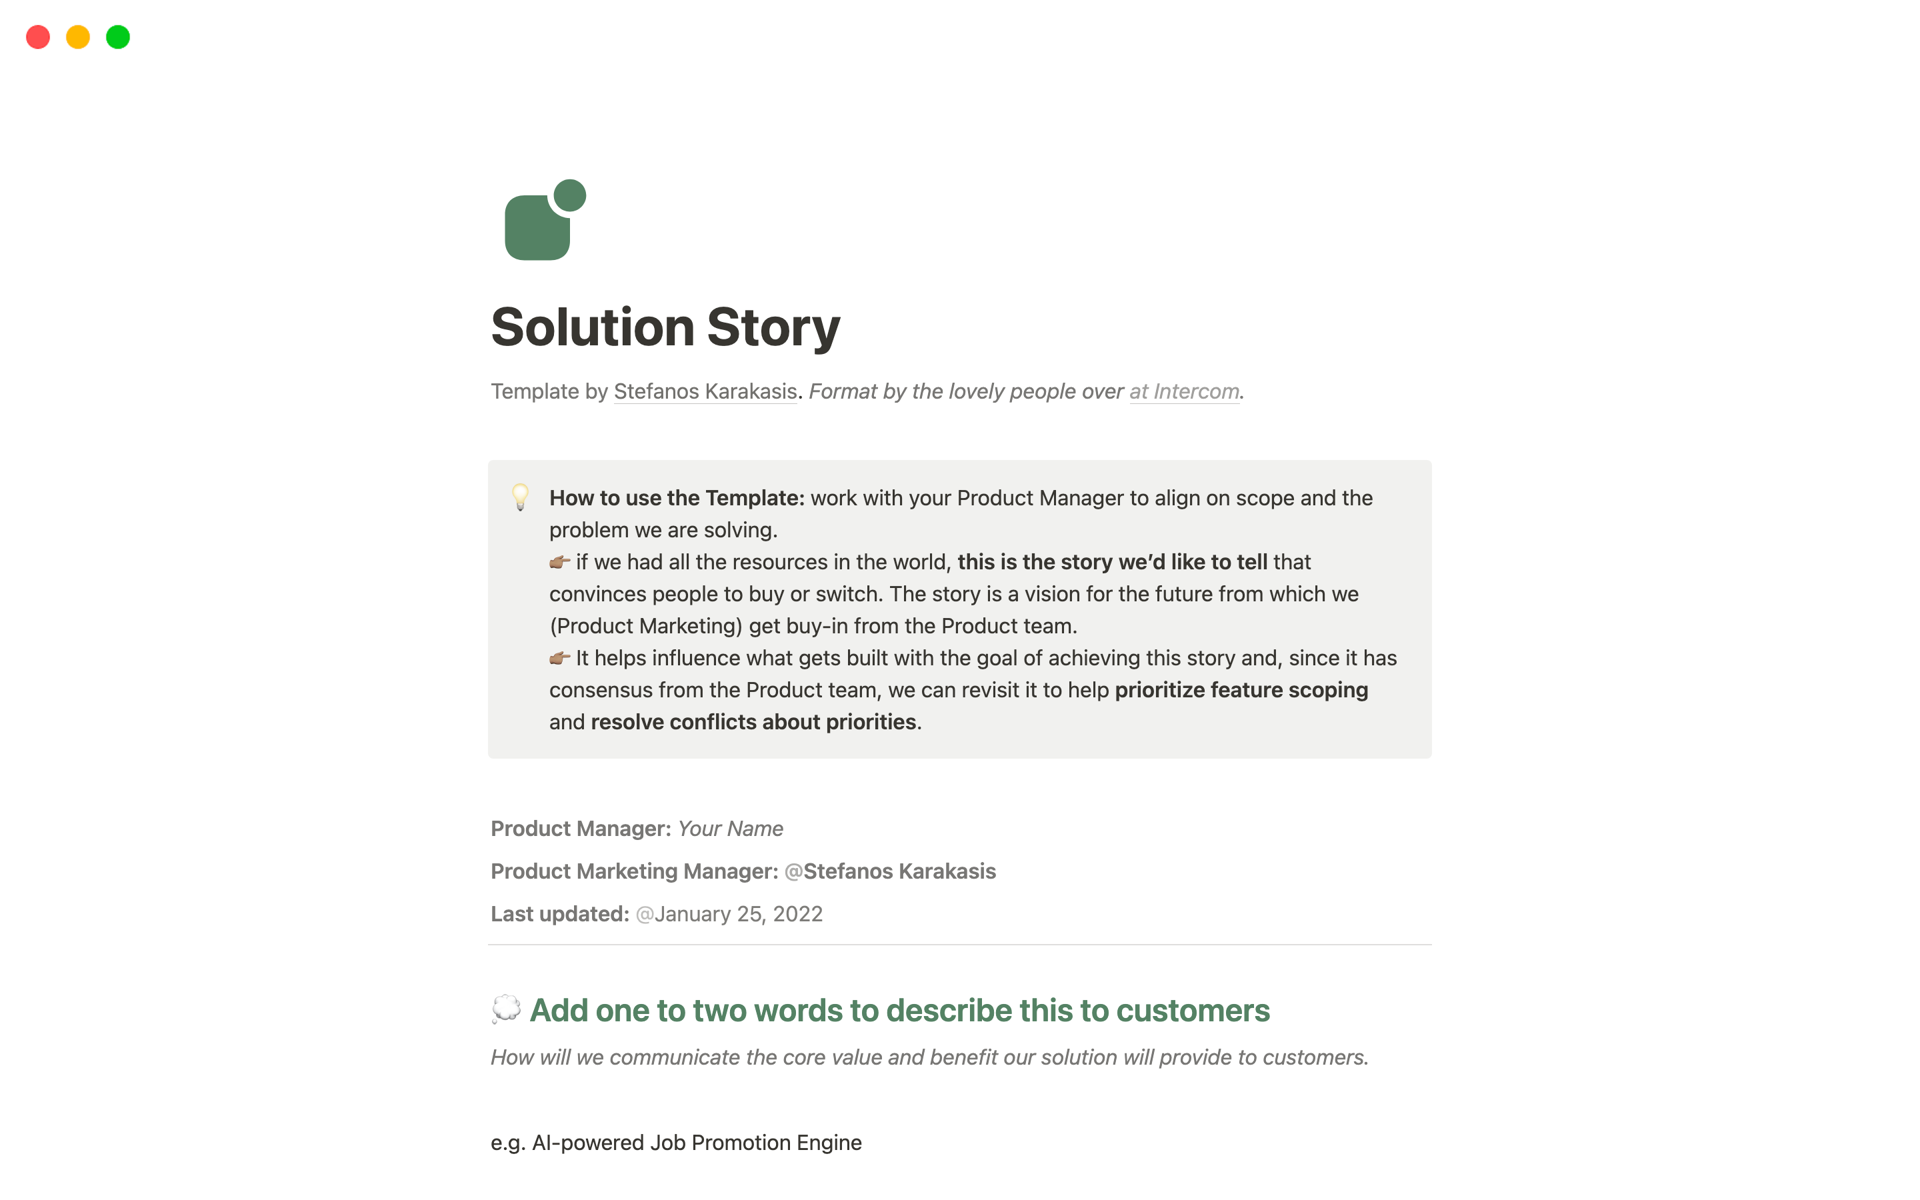 Solution Story - One Page Product Messaging Brief님의 템플릿 미리보기